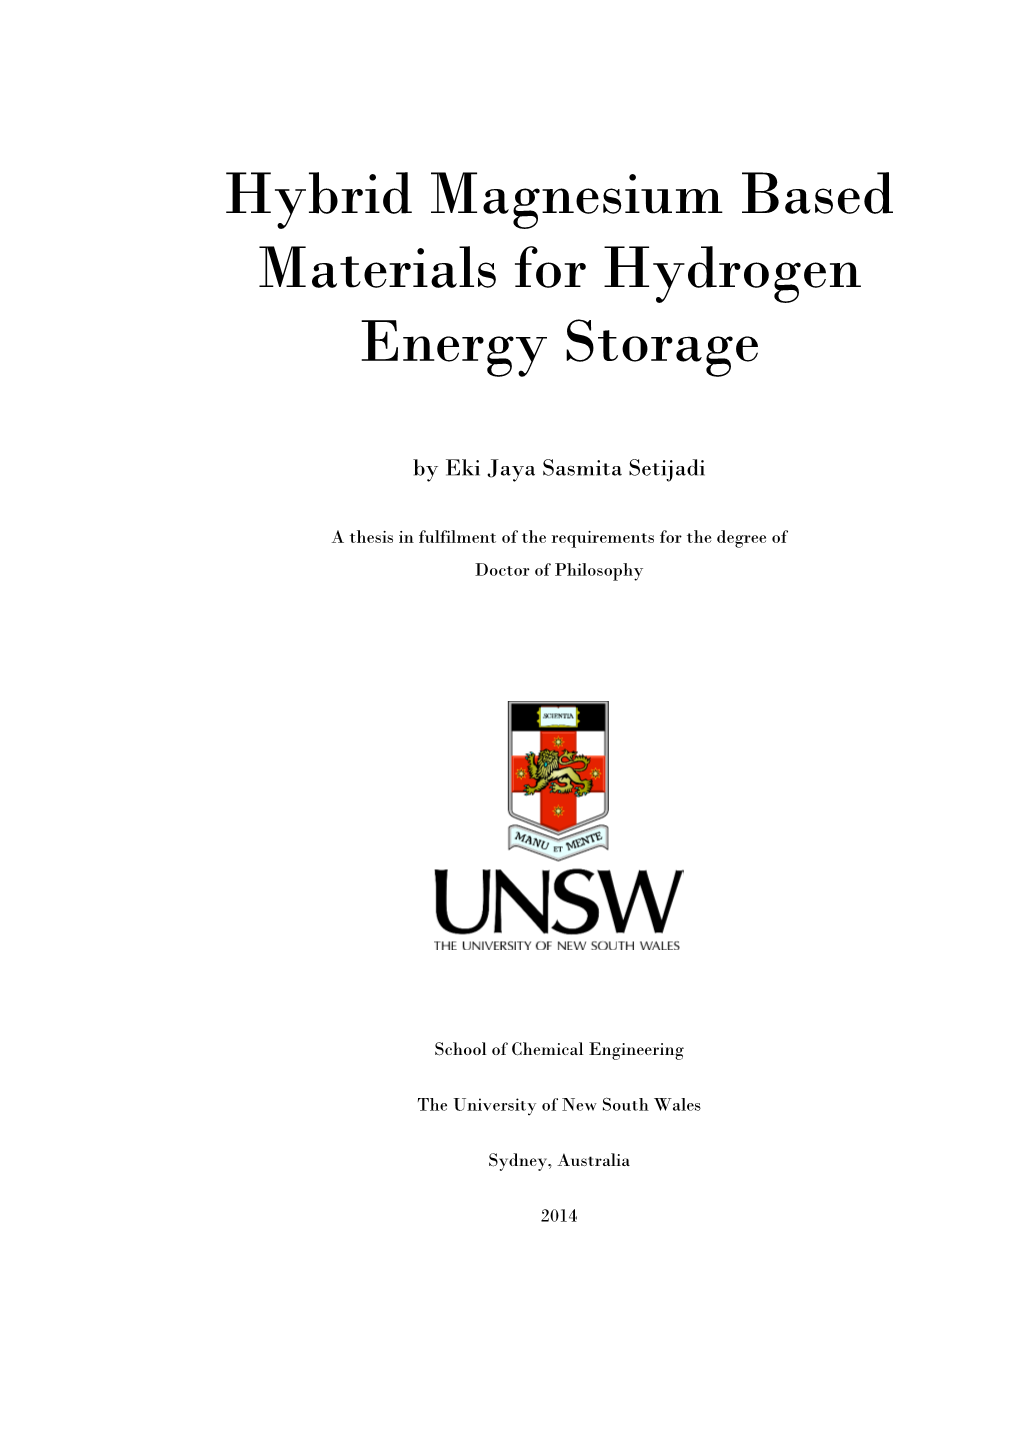 Hybrid Magnesium Based Materials for Hydrogen Energy Storage